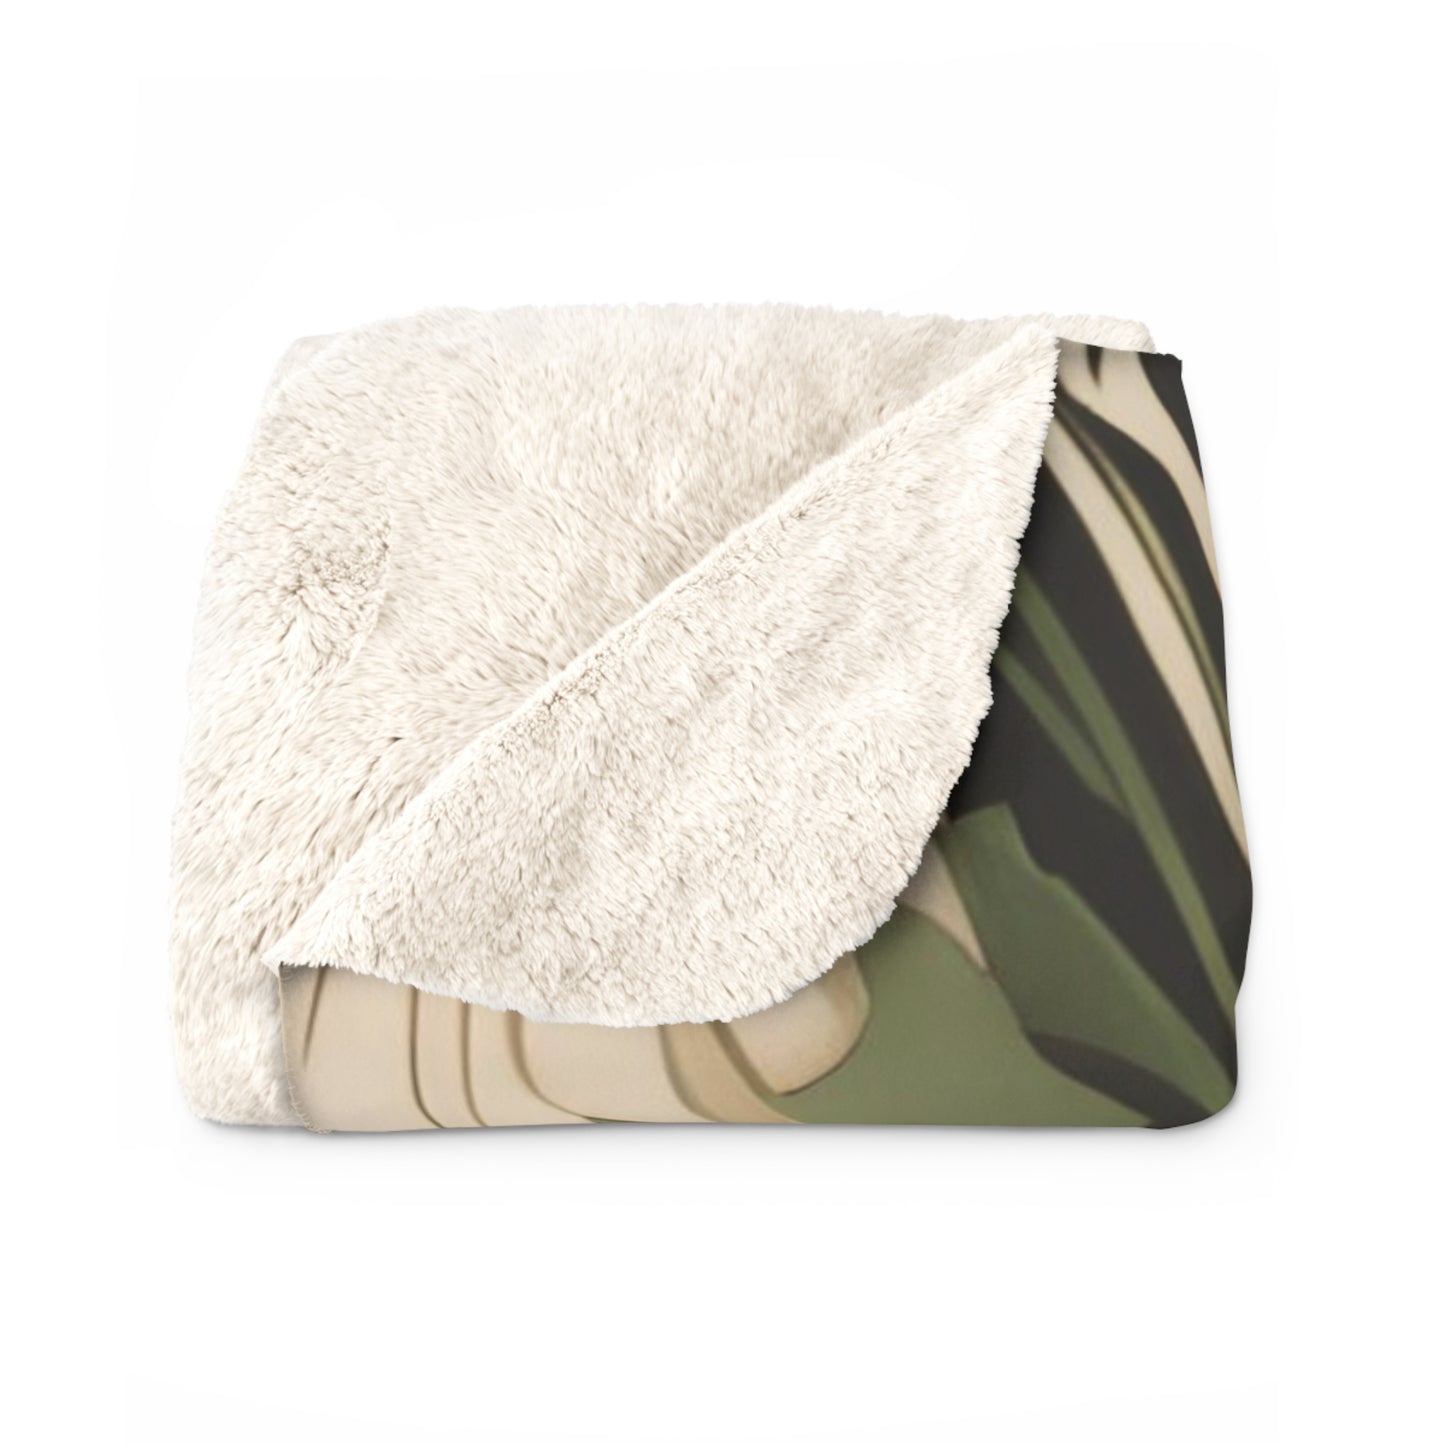 Holiday Flowers, Sherpa Fleece Blanket for Cozy Warmth, 50"x60"